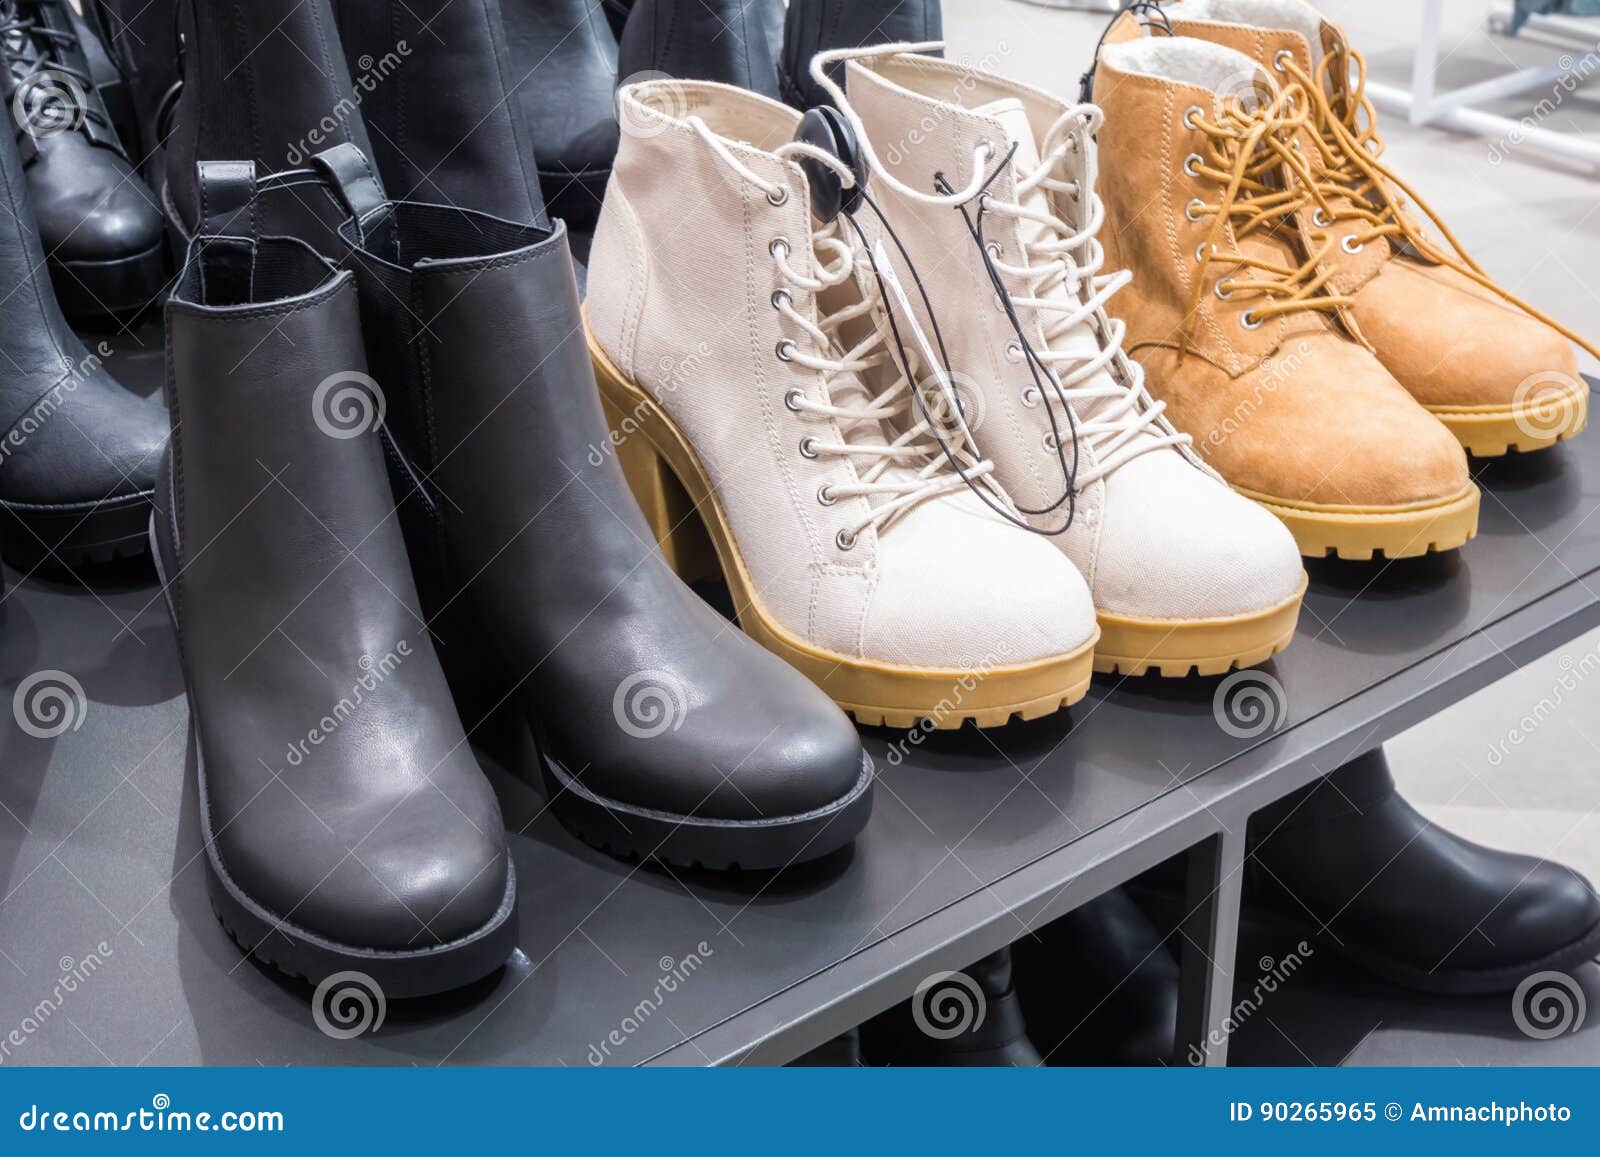 Women boots collection. stock image. Image of accessory - 90265965